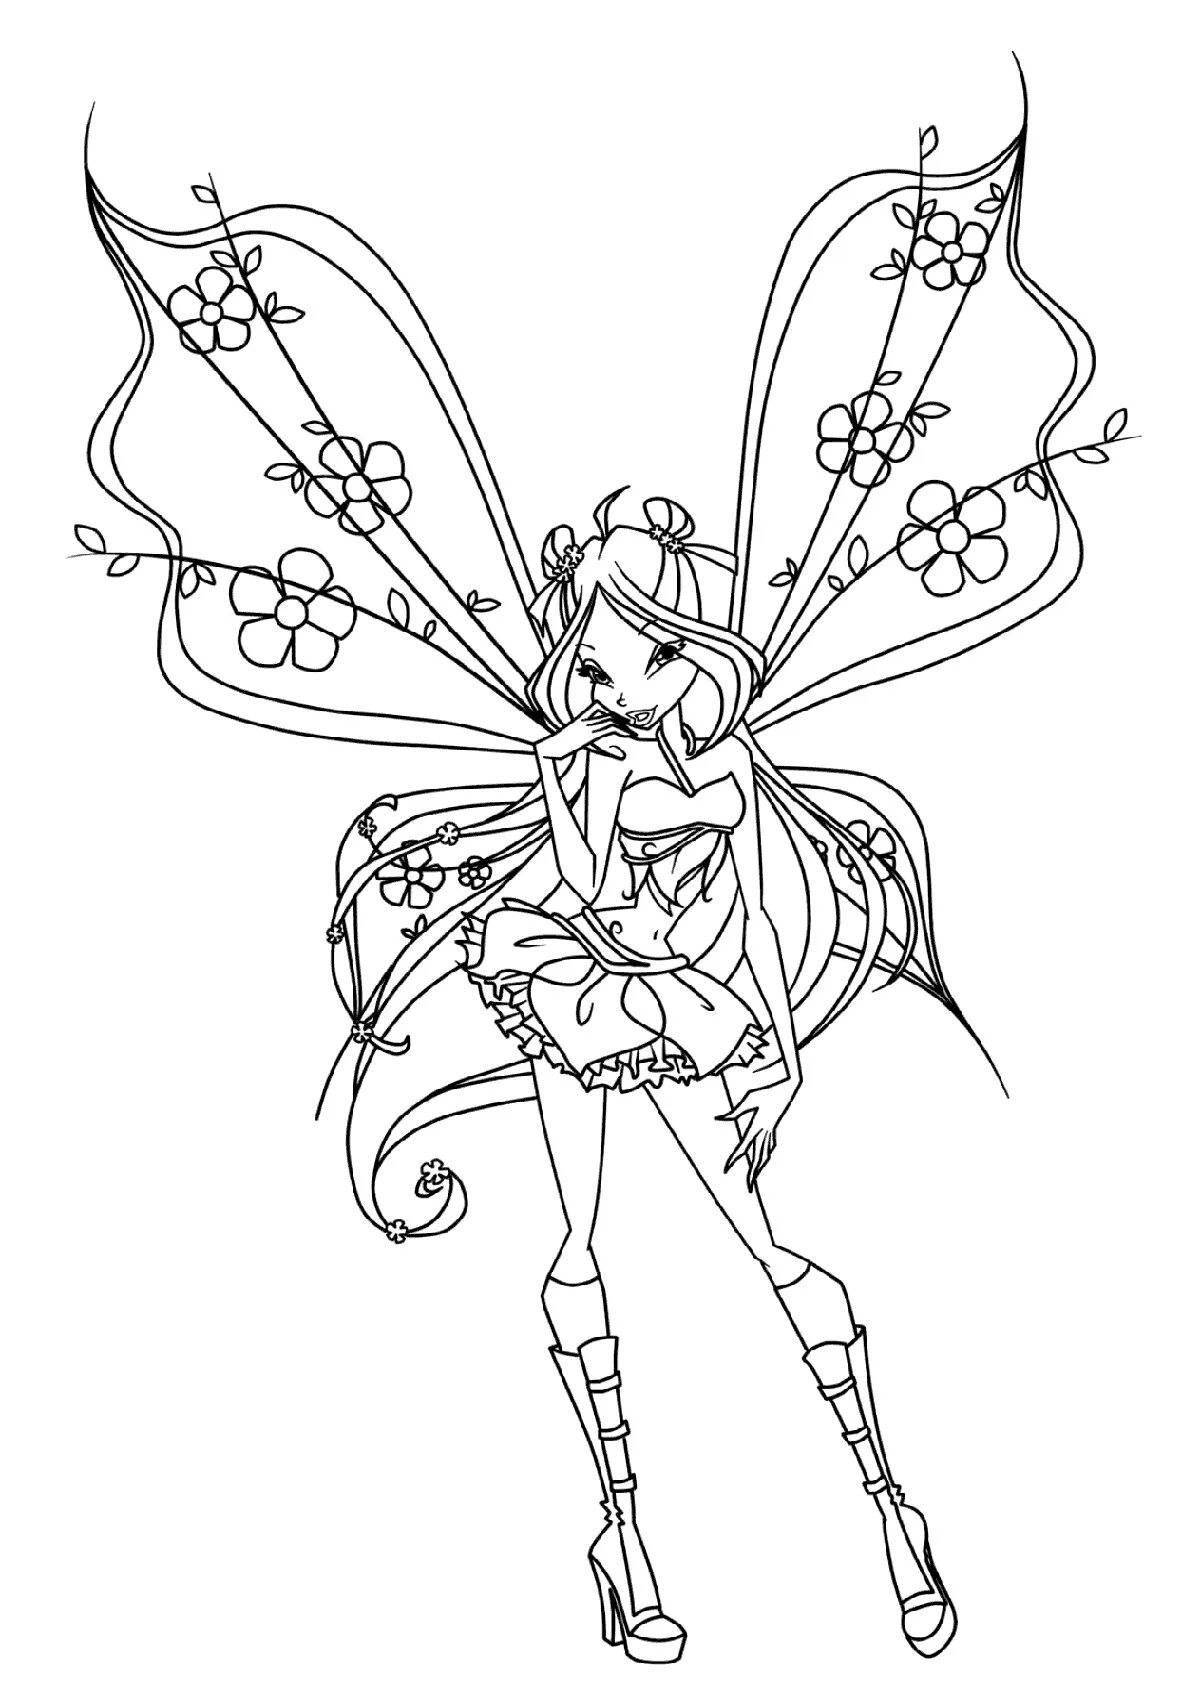 Winx dreamy coloring pictures